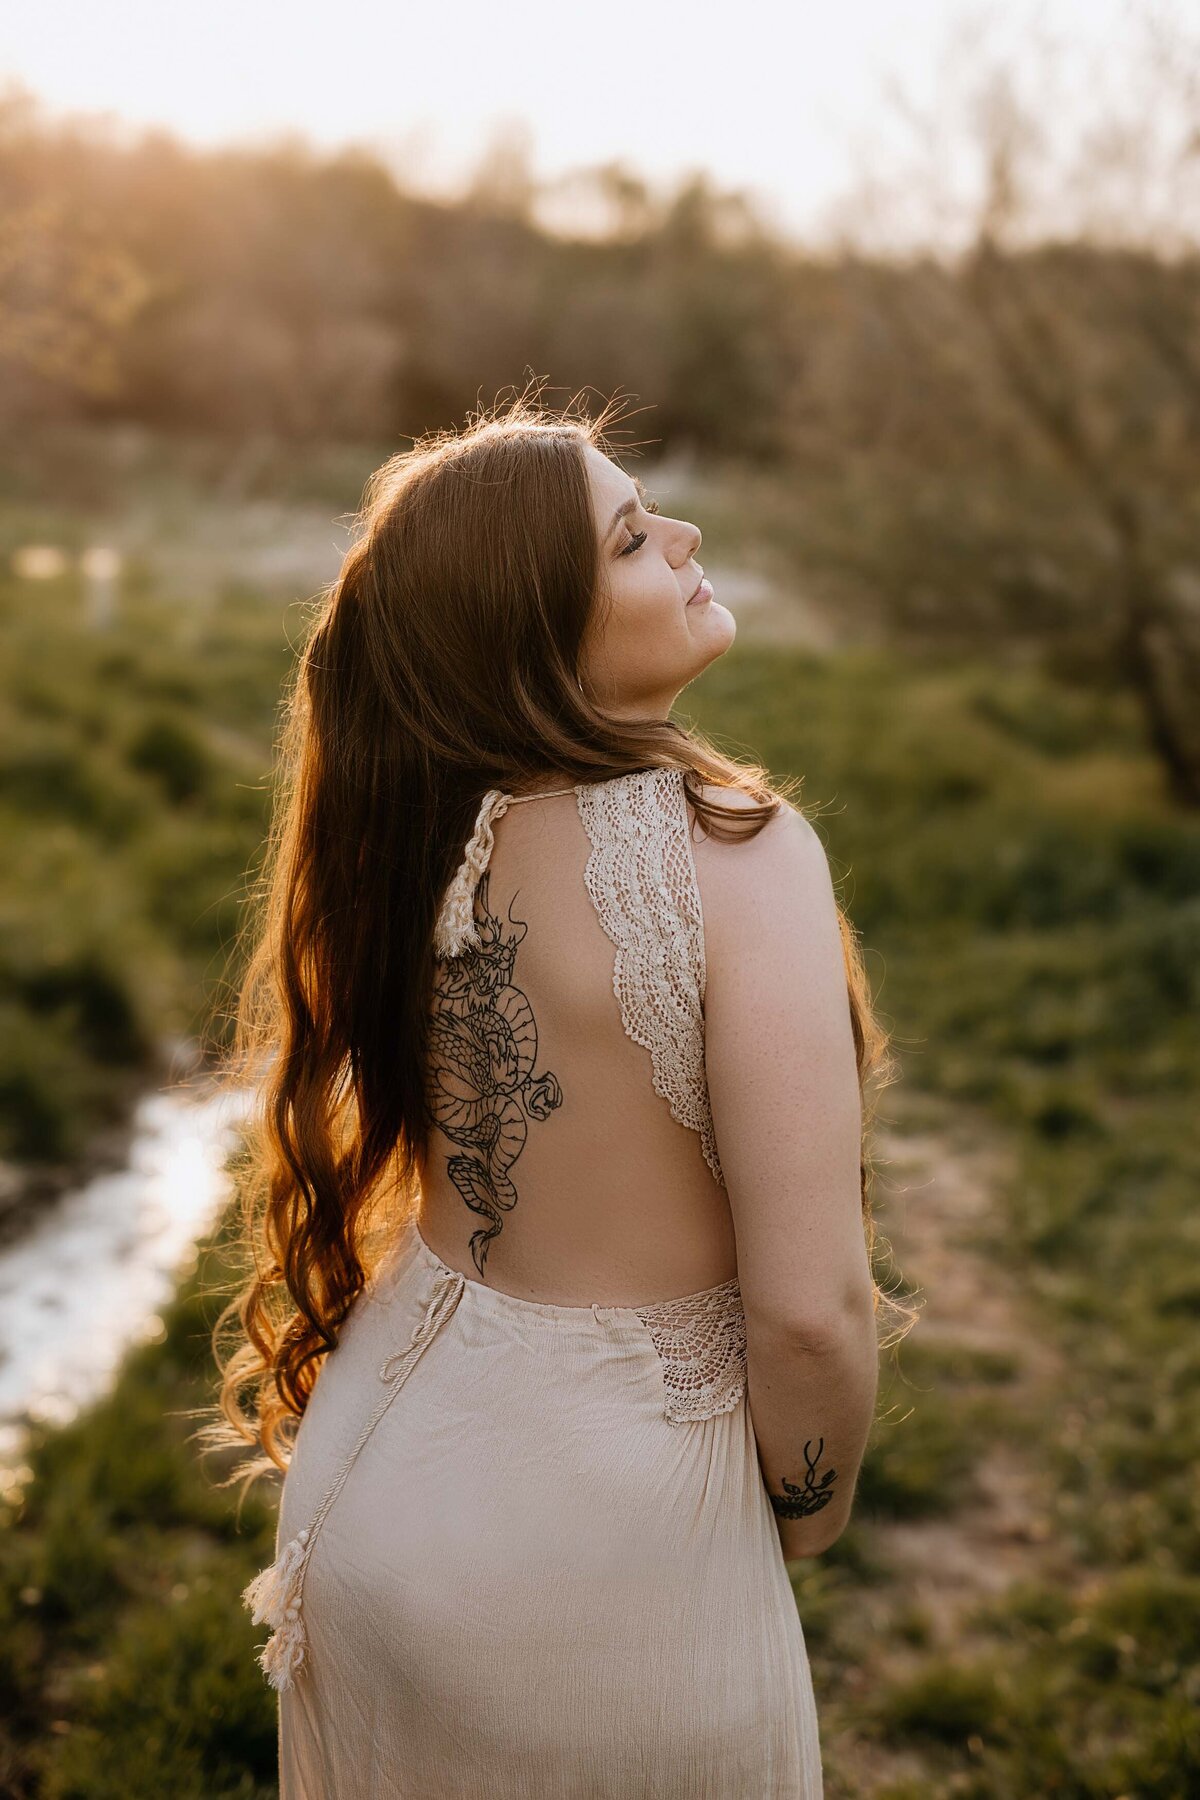 Expectant mom in London, Ontario field at golden hour - mom in long maternity gown with her back to the camera. Her face is turned toward the camera, smiling at the sky. Captured by Kimberly Roy top London Ontario maternity photographer